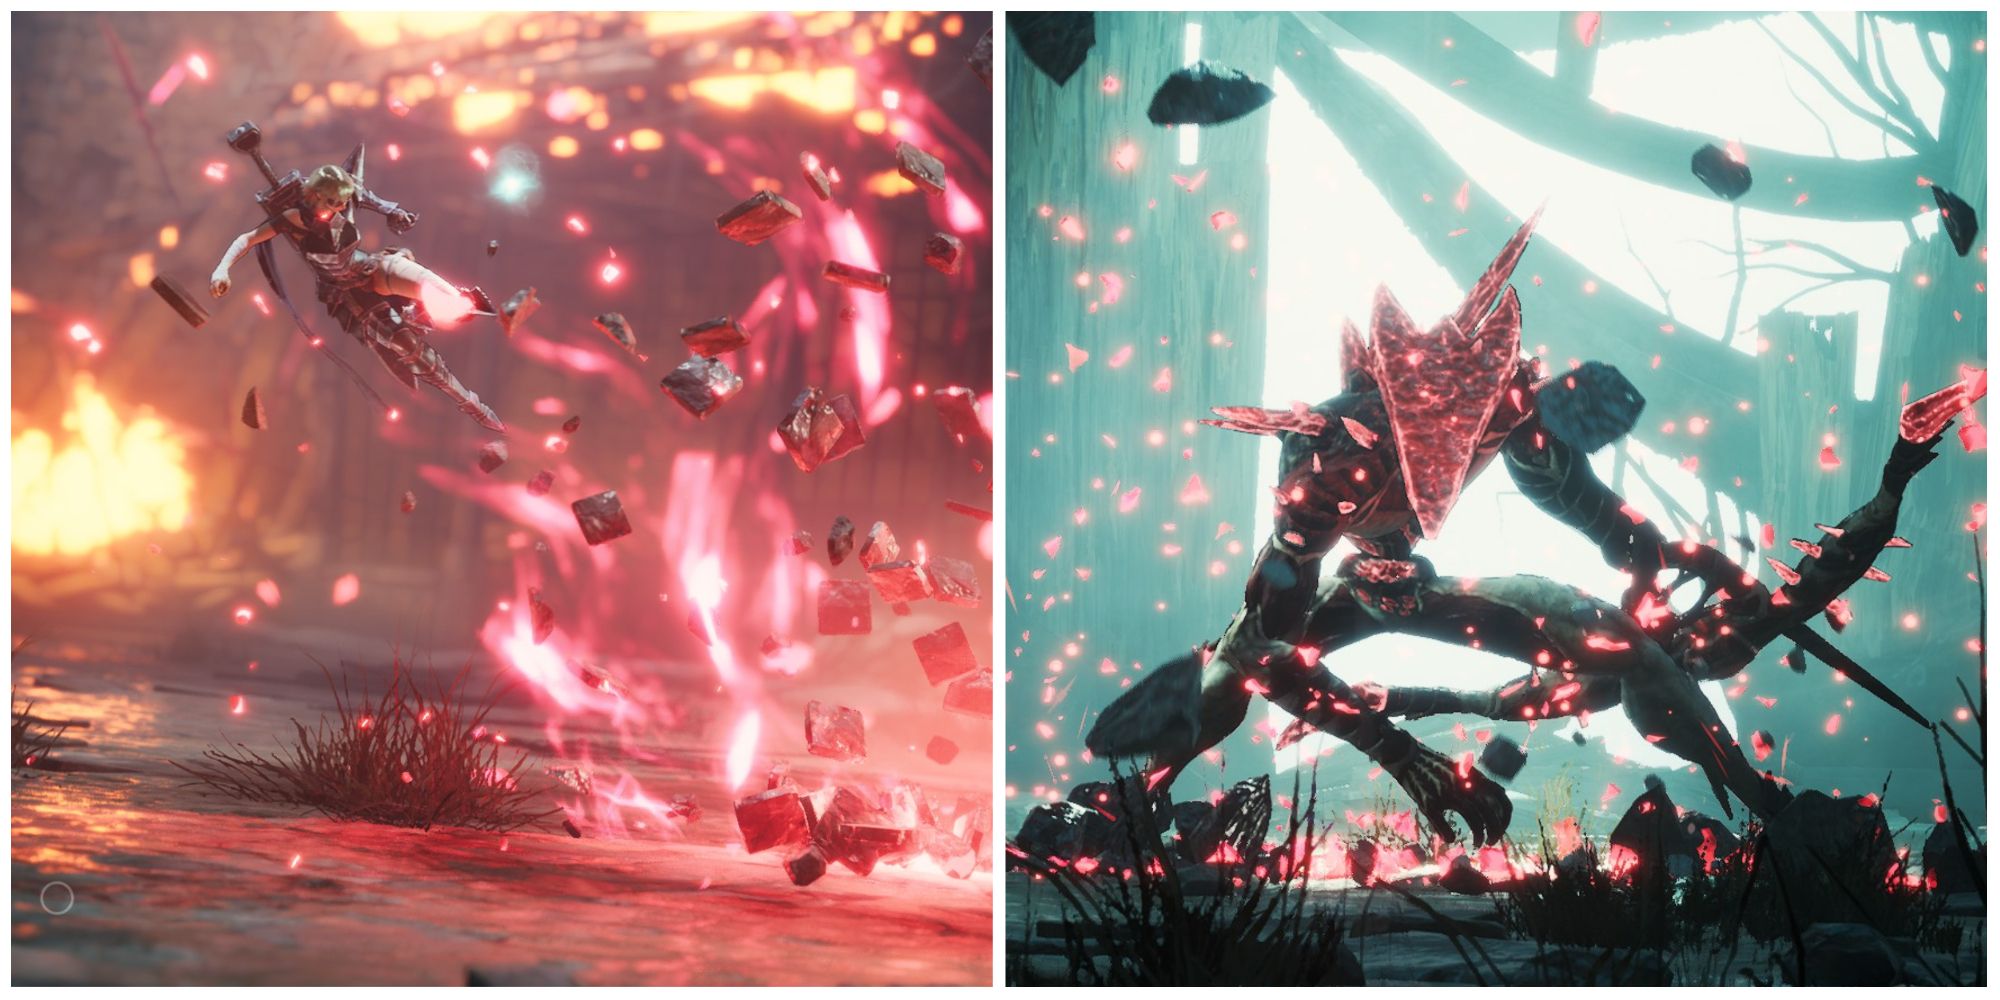 Split image of player character jumping away from a red energy blast and of Arrowhead